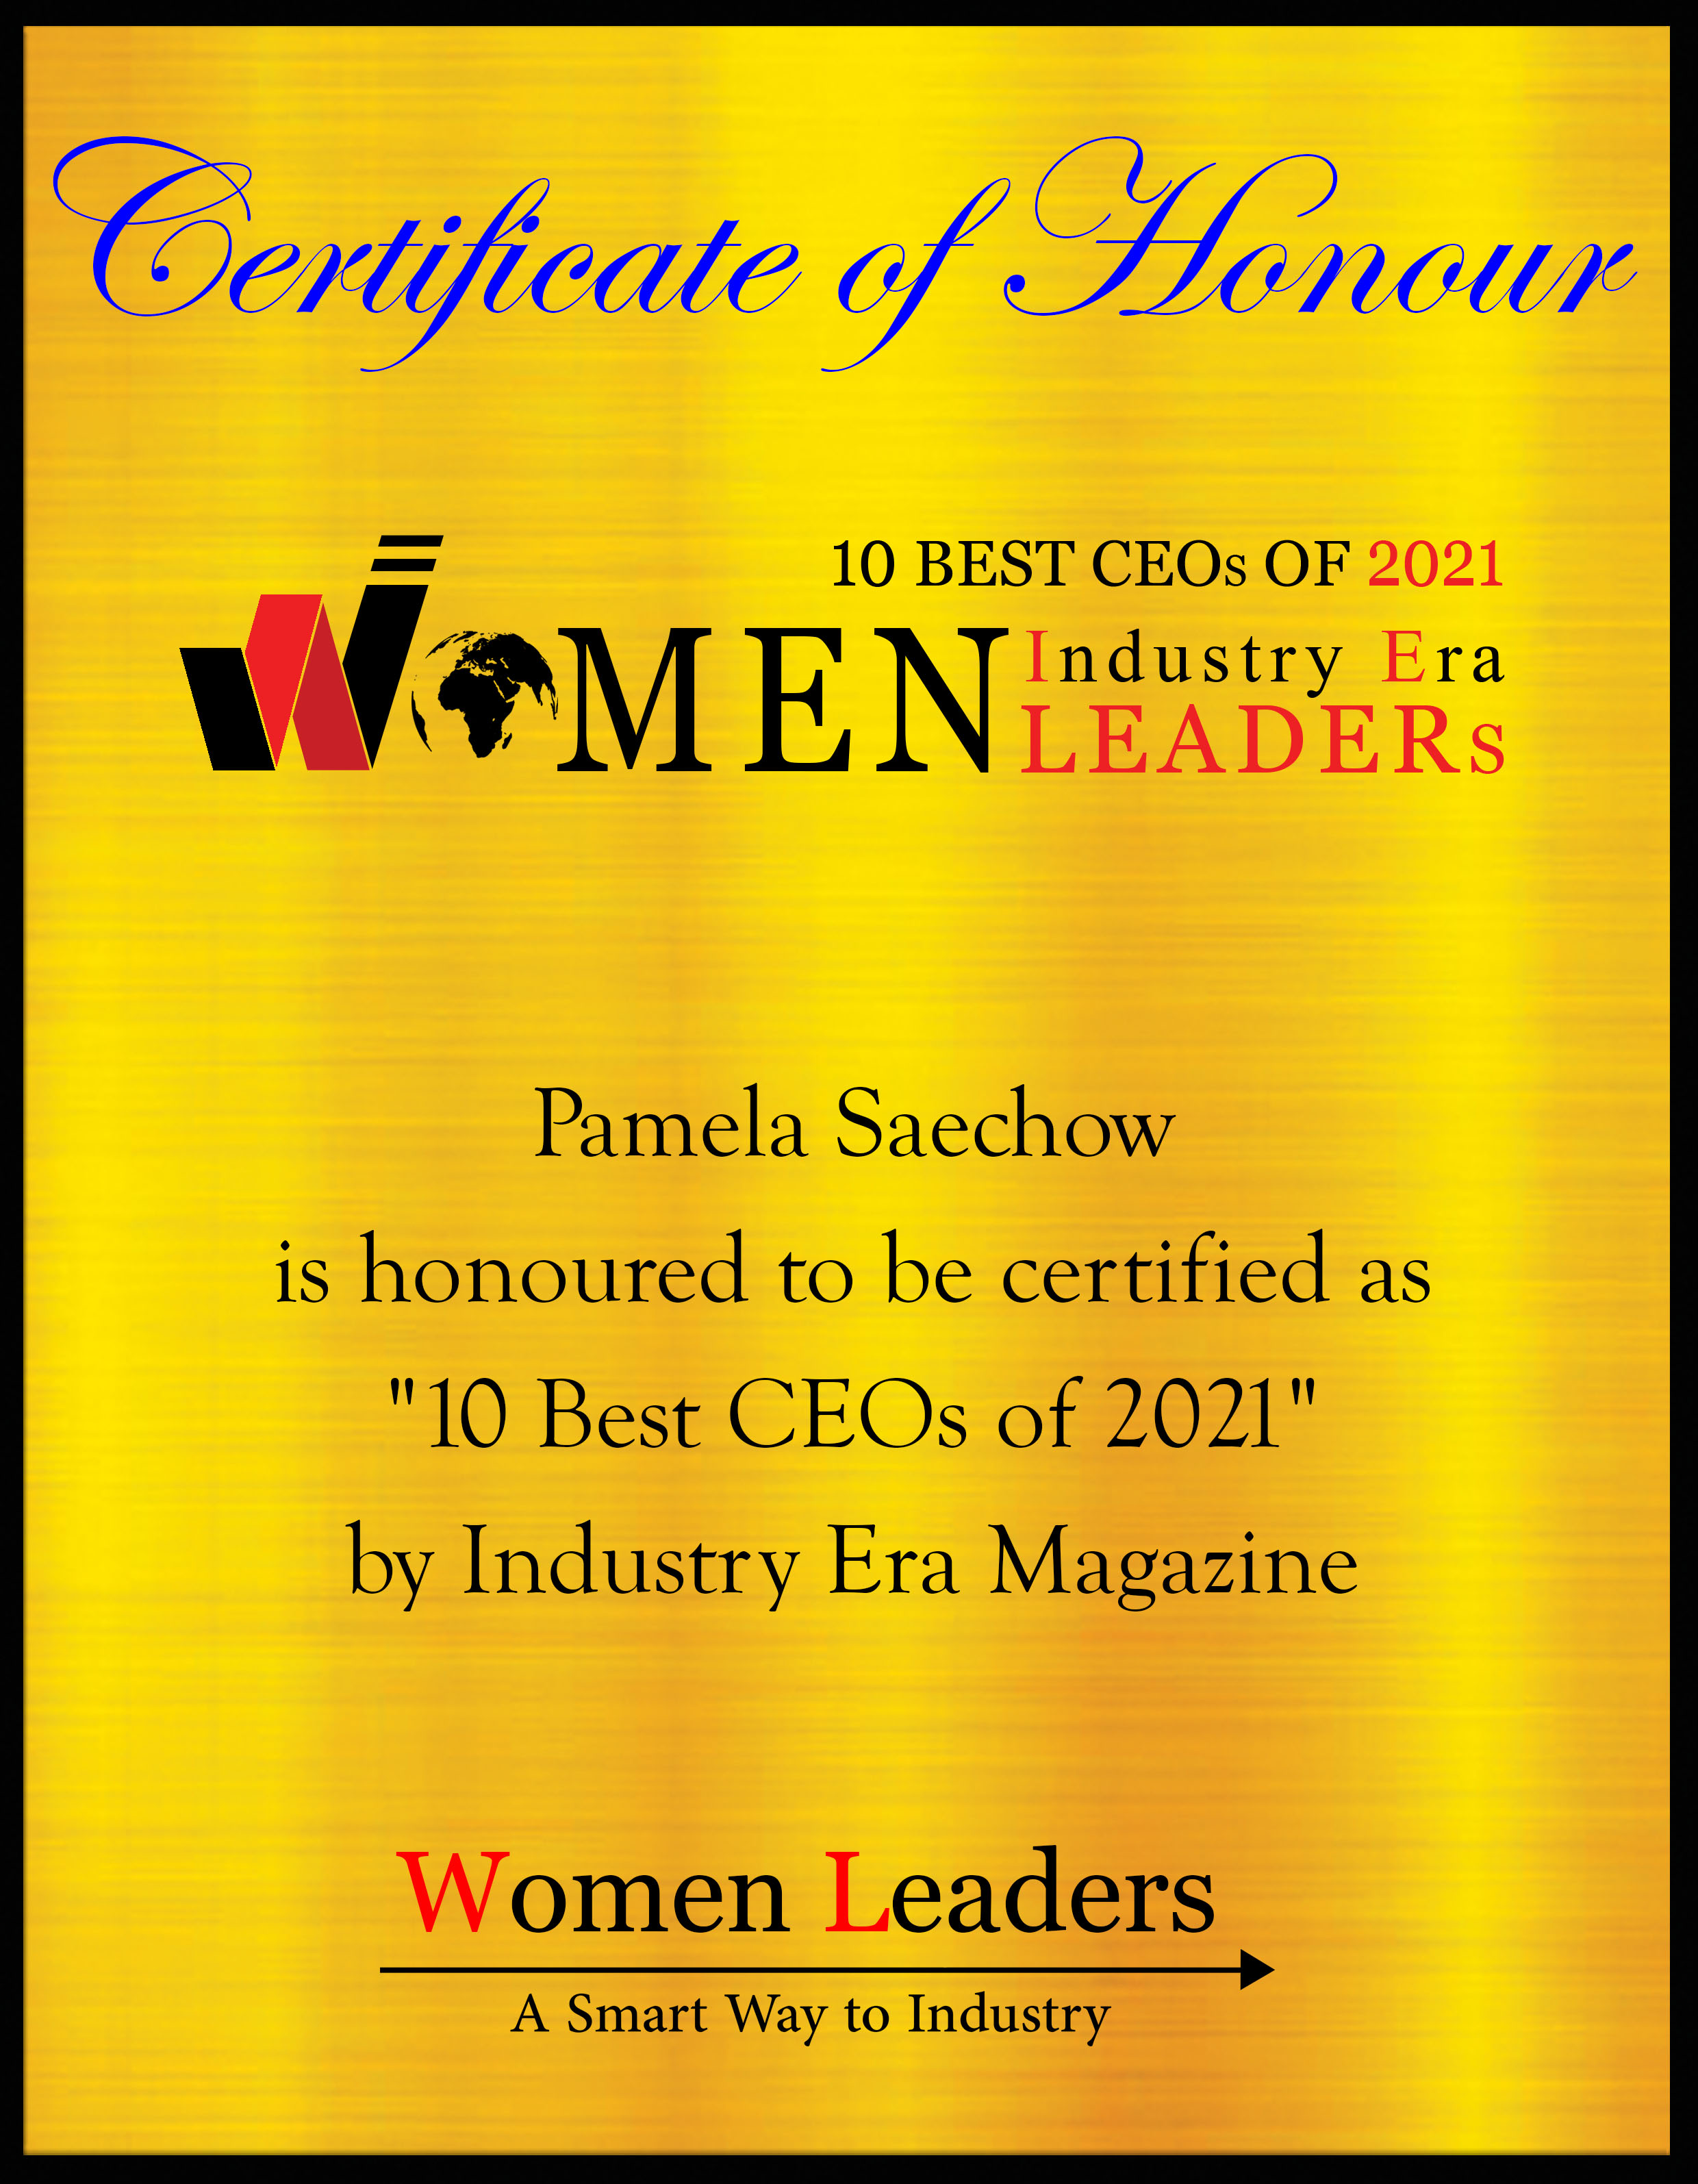 Pamela Saechow, Founder & CEO of Ellit Groups certificate